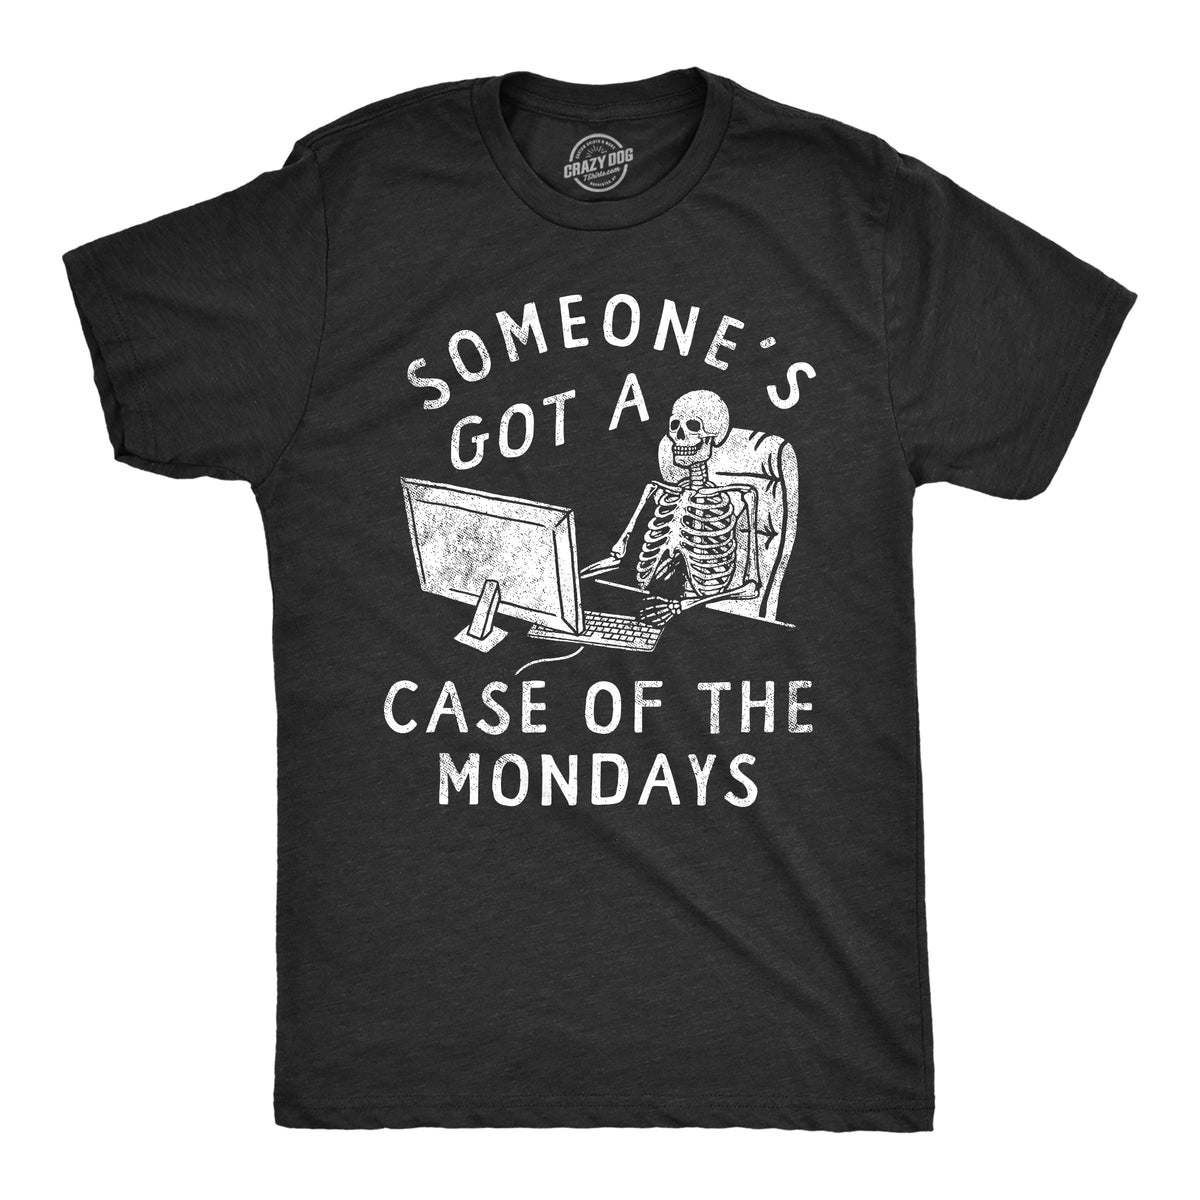 Funny Heather Black - Case Of The Mondays Someones Got A Case Of The Mondays Mens T Shirt Nerdy Office sarcastic Tee